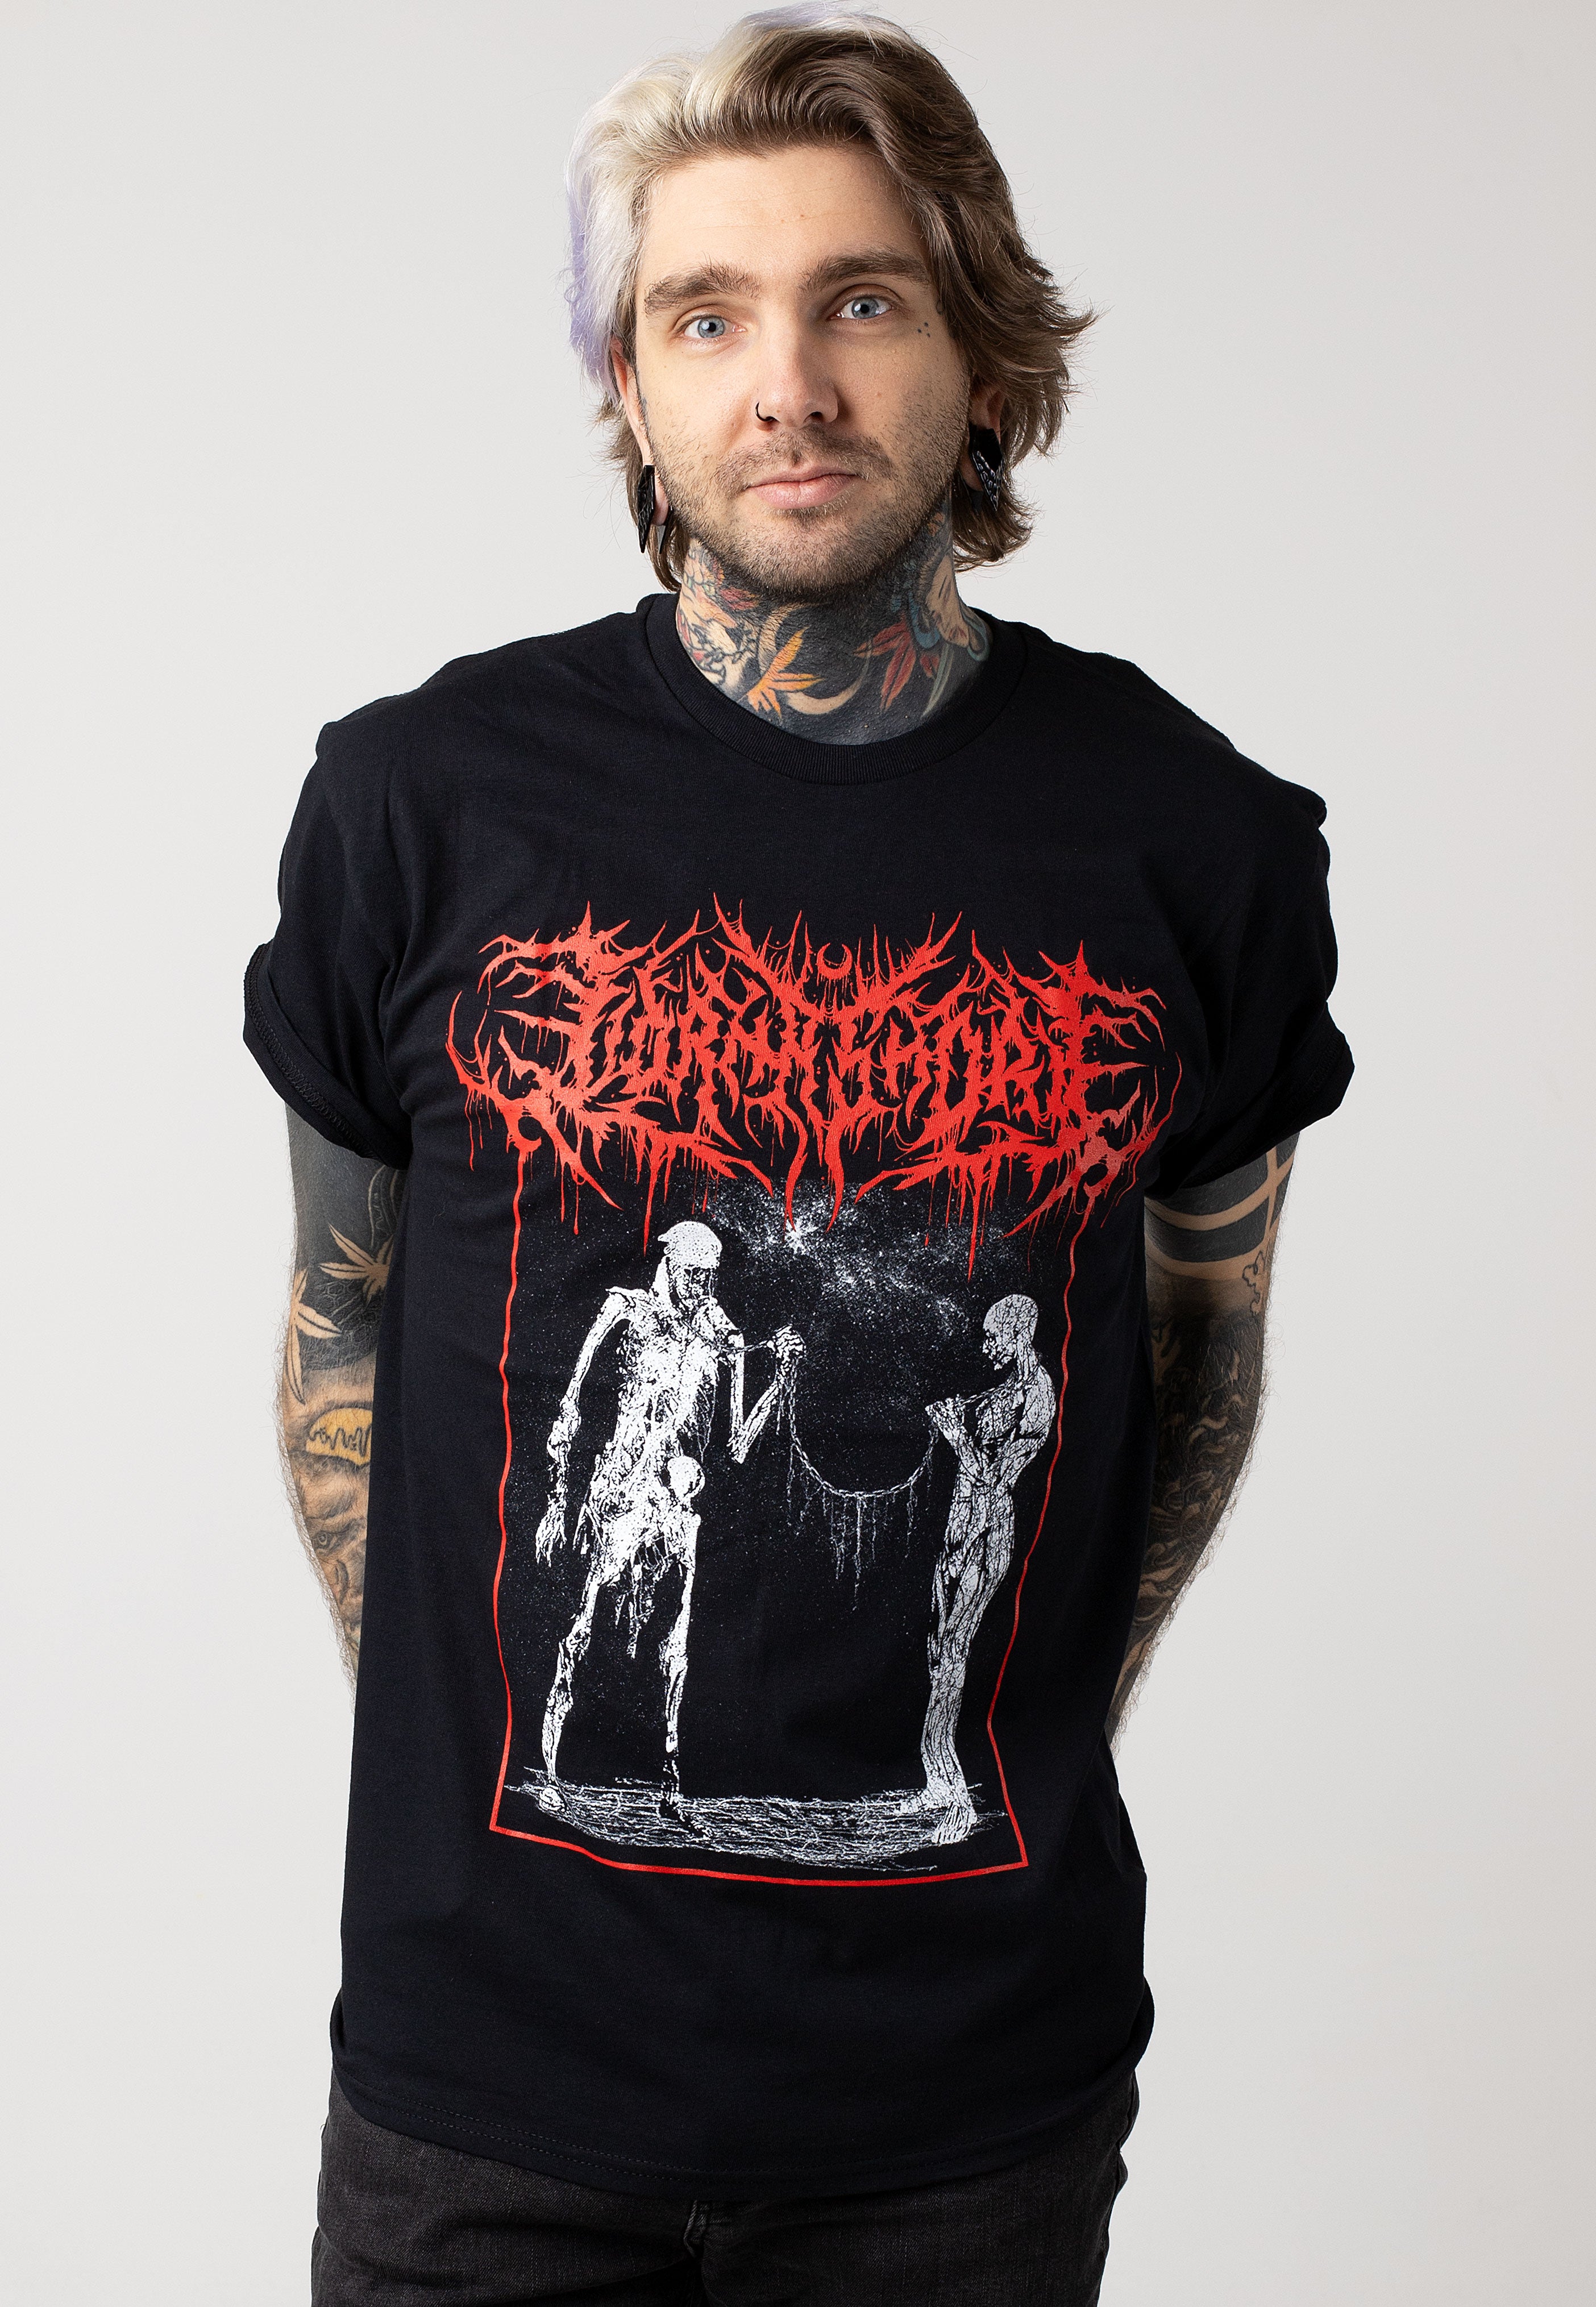 Lorna Shore - In Chains - T-Shirt | Men-Image